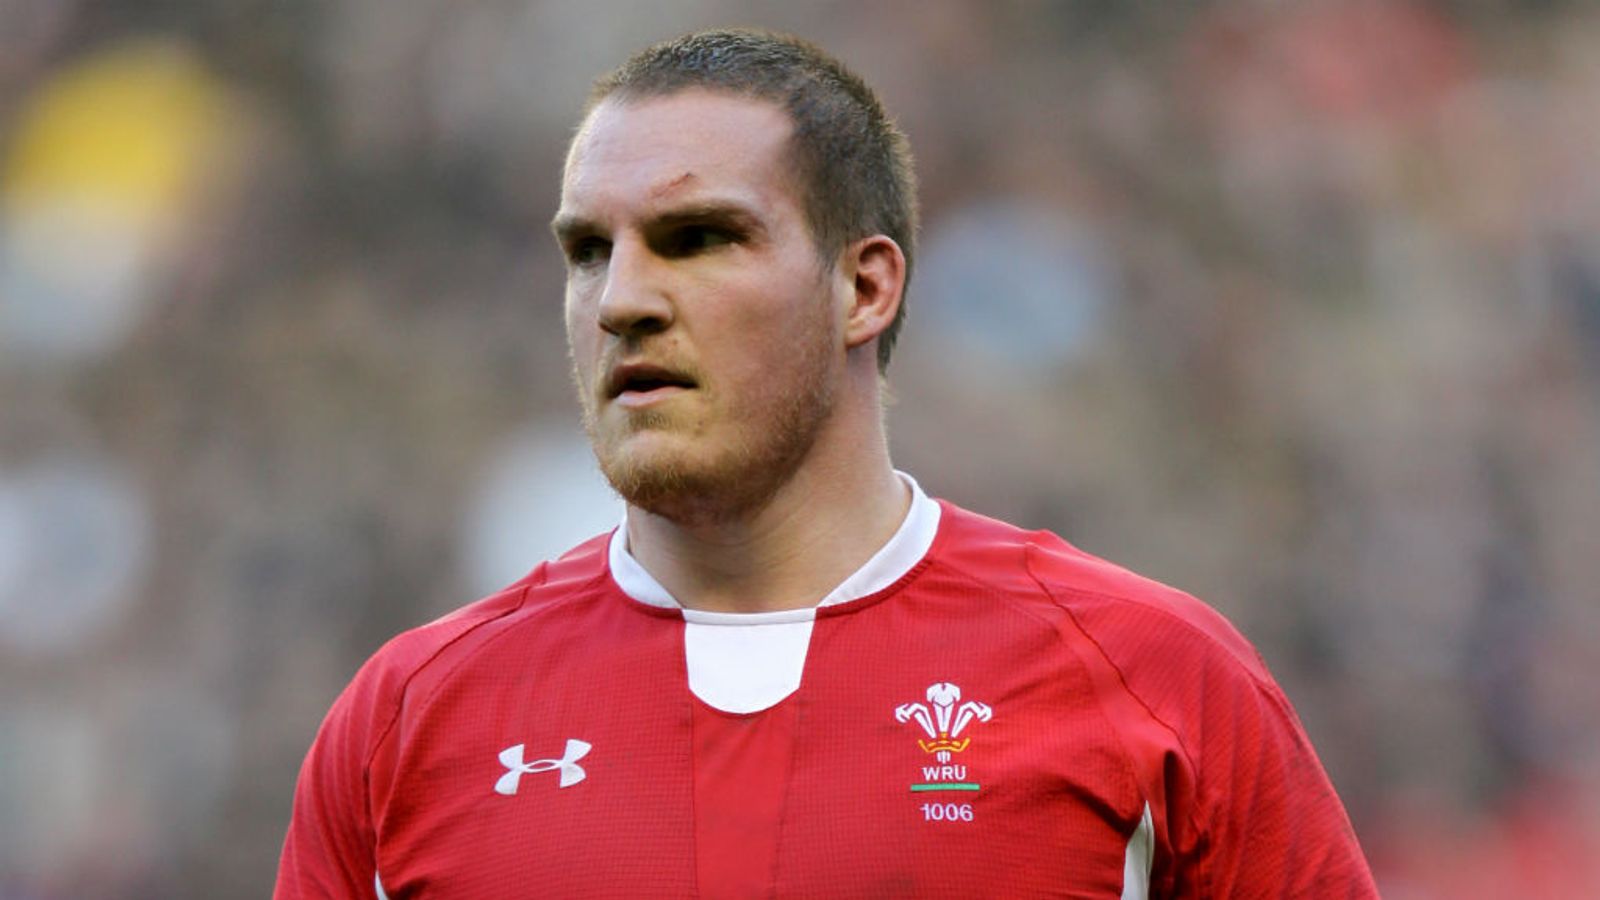 Gethin Jenkins Wales & Celtic Warriors Rugby Union Wales V